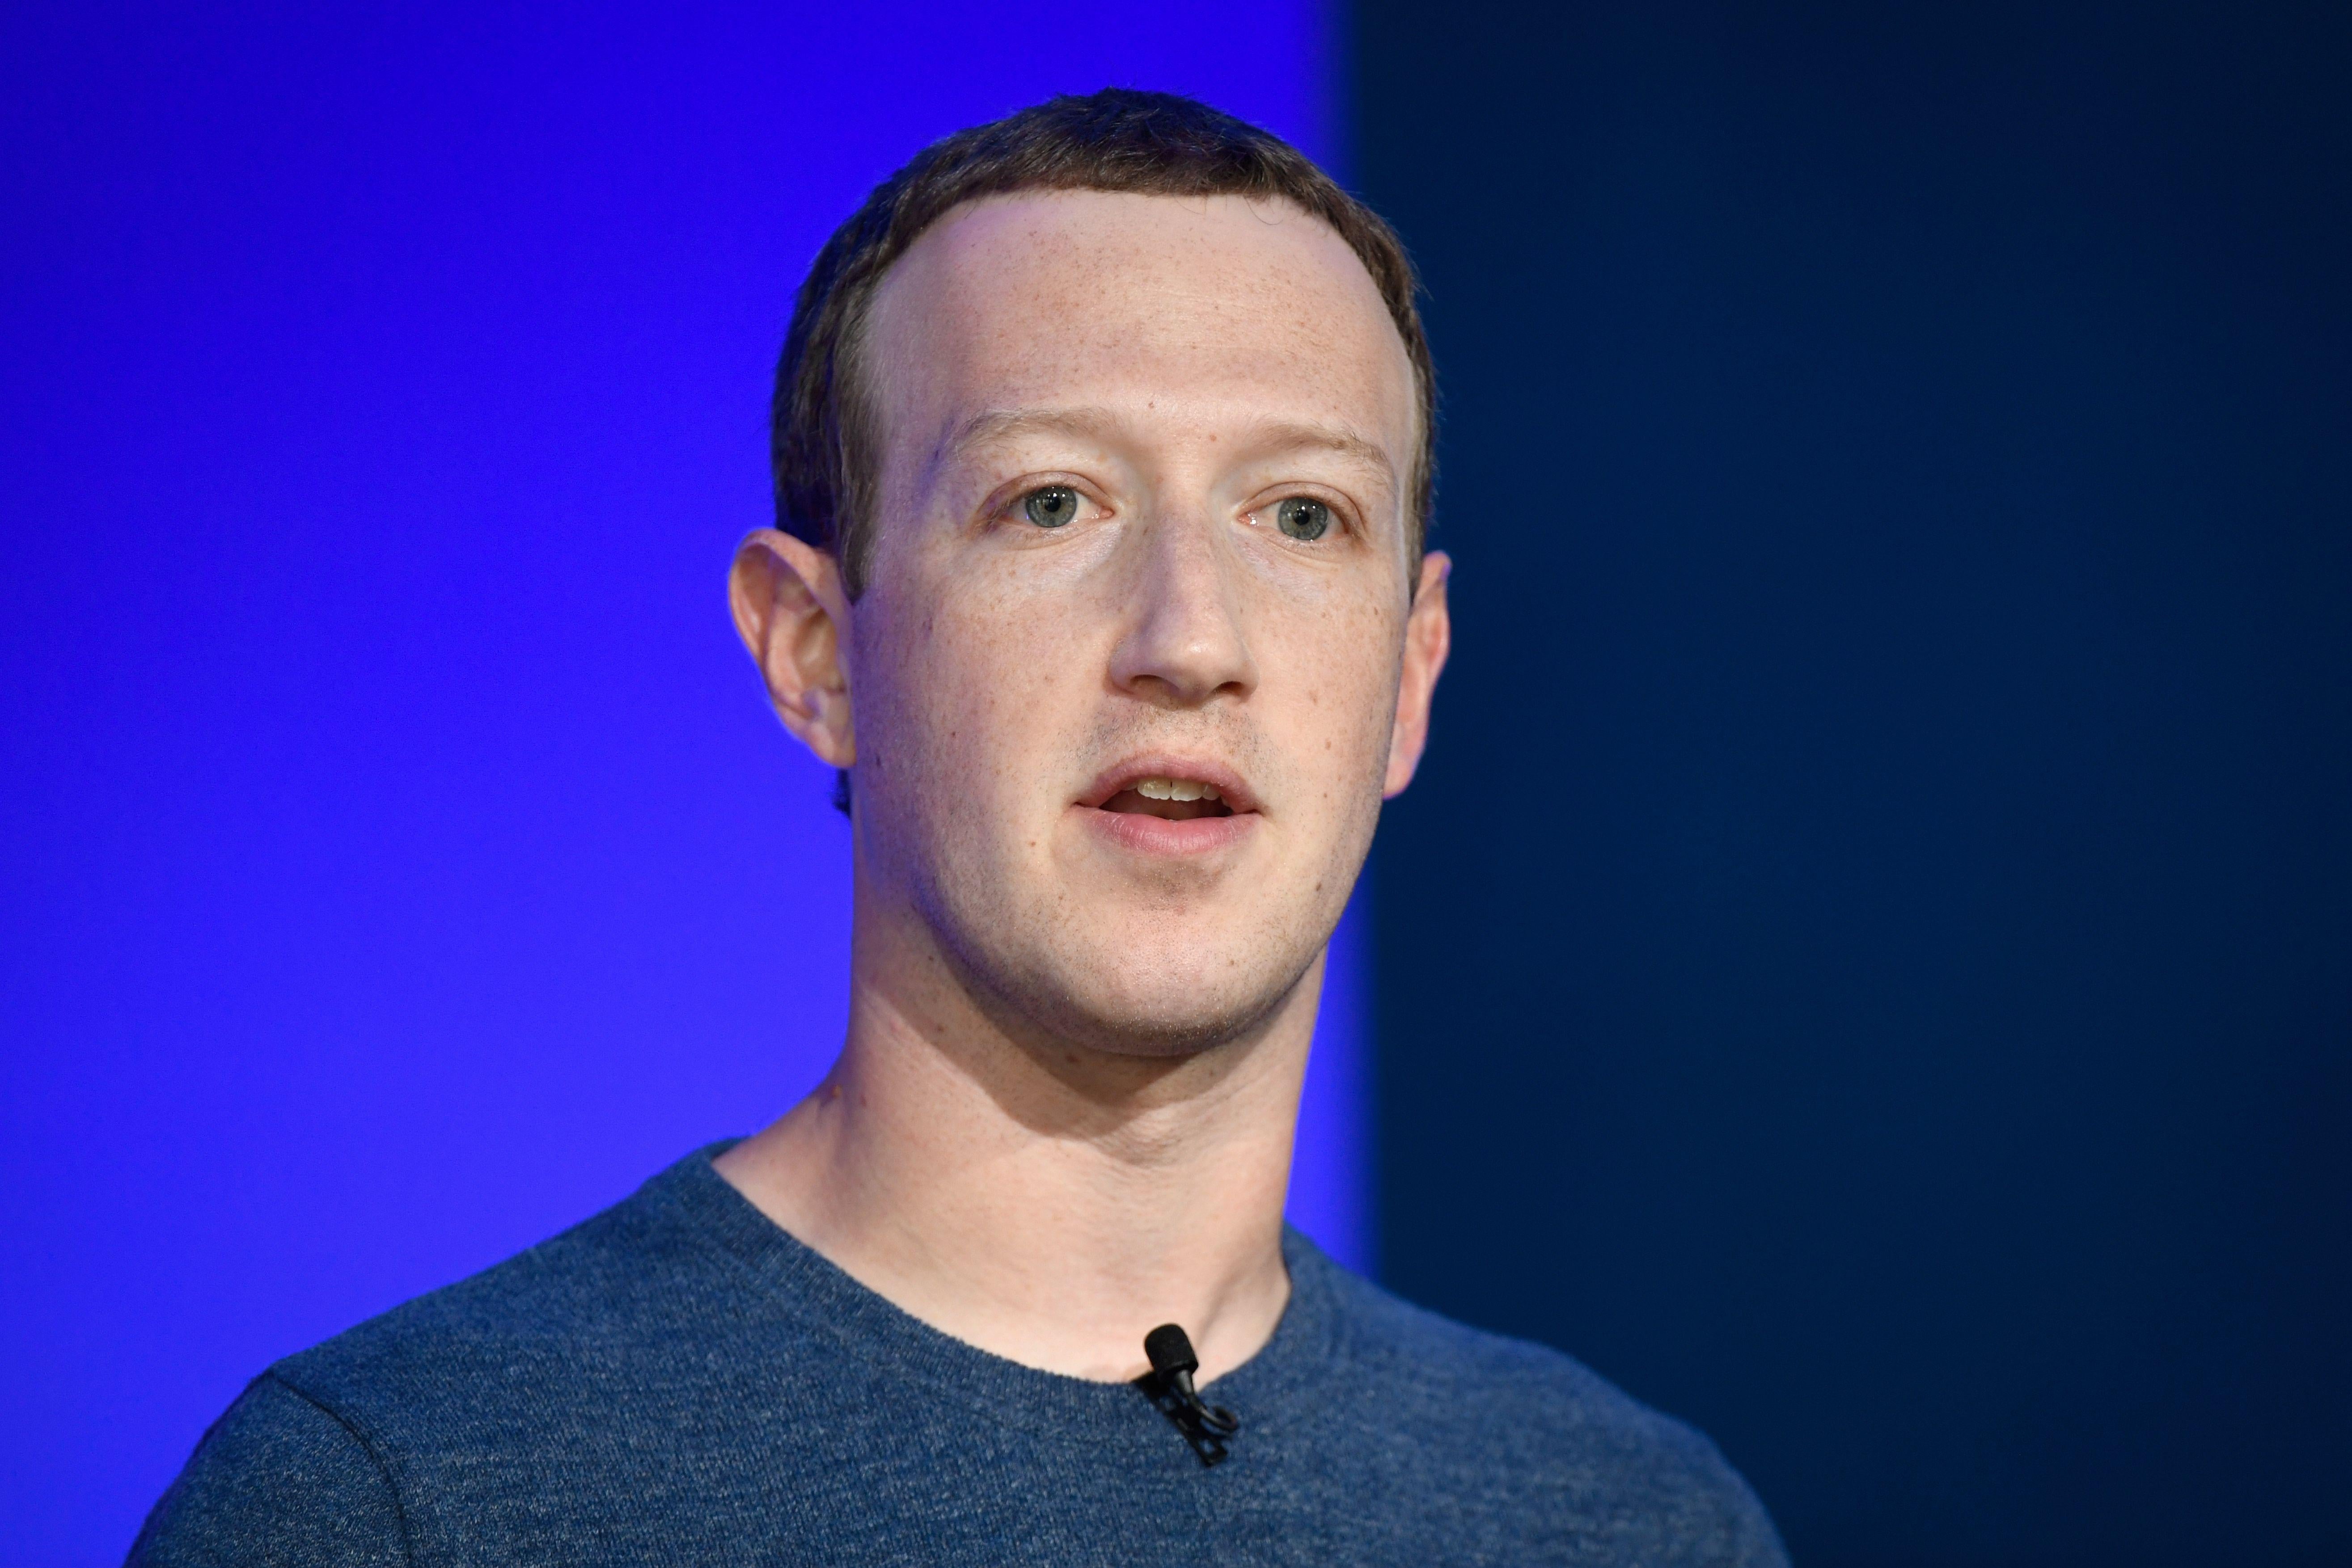 Facebook CEO Mark Zuckerberg speaks at a press conference.